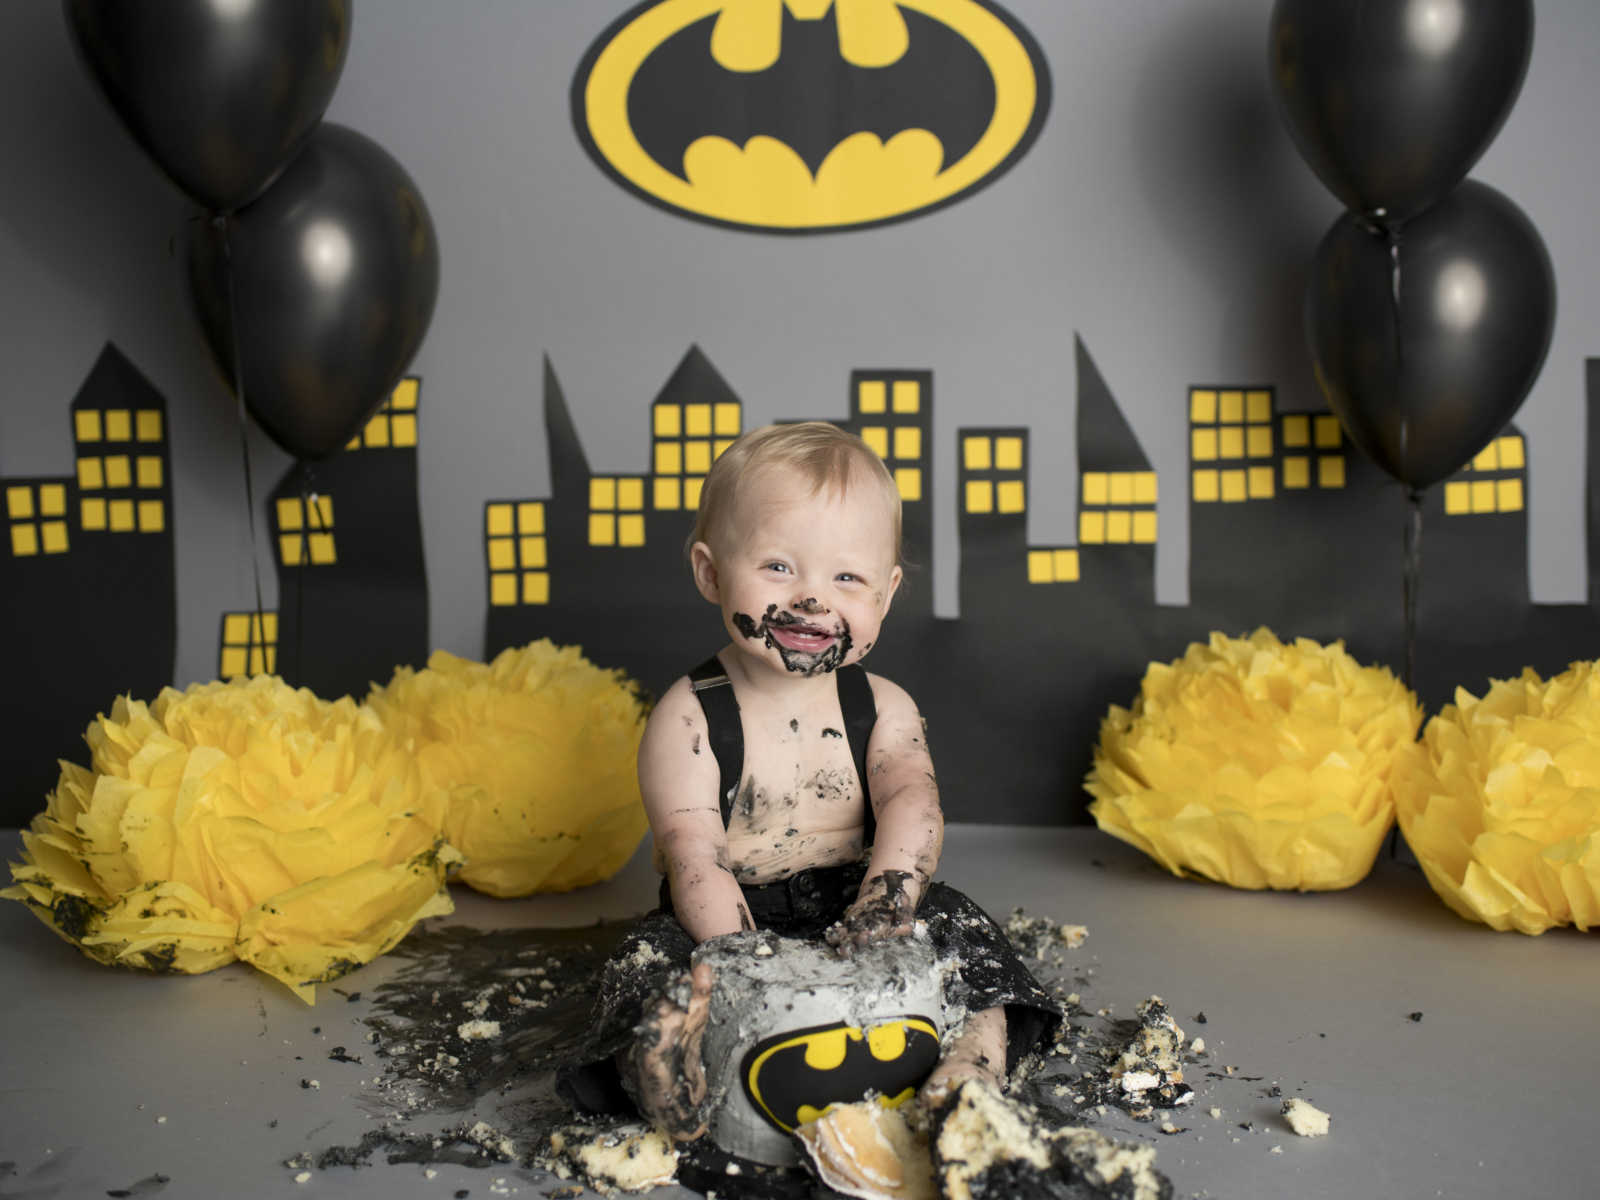 infant boy in suspenders destroying batman cake in front of backdrop of Gotham city, black balloons and batman logo